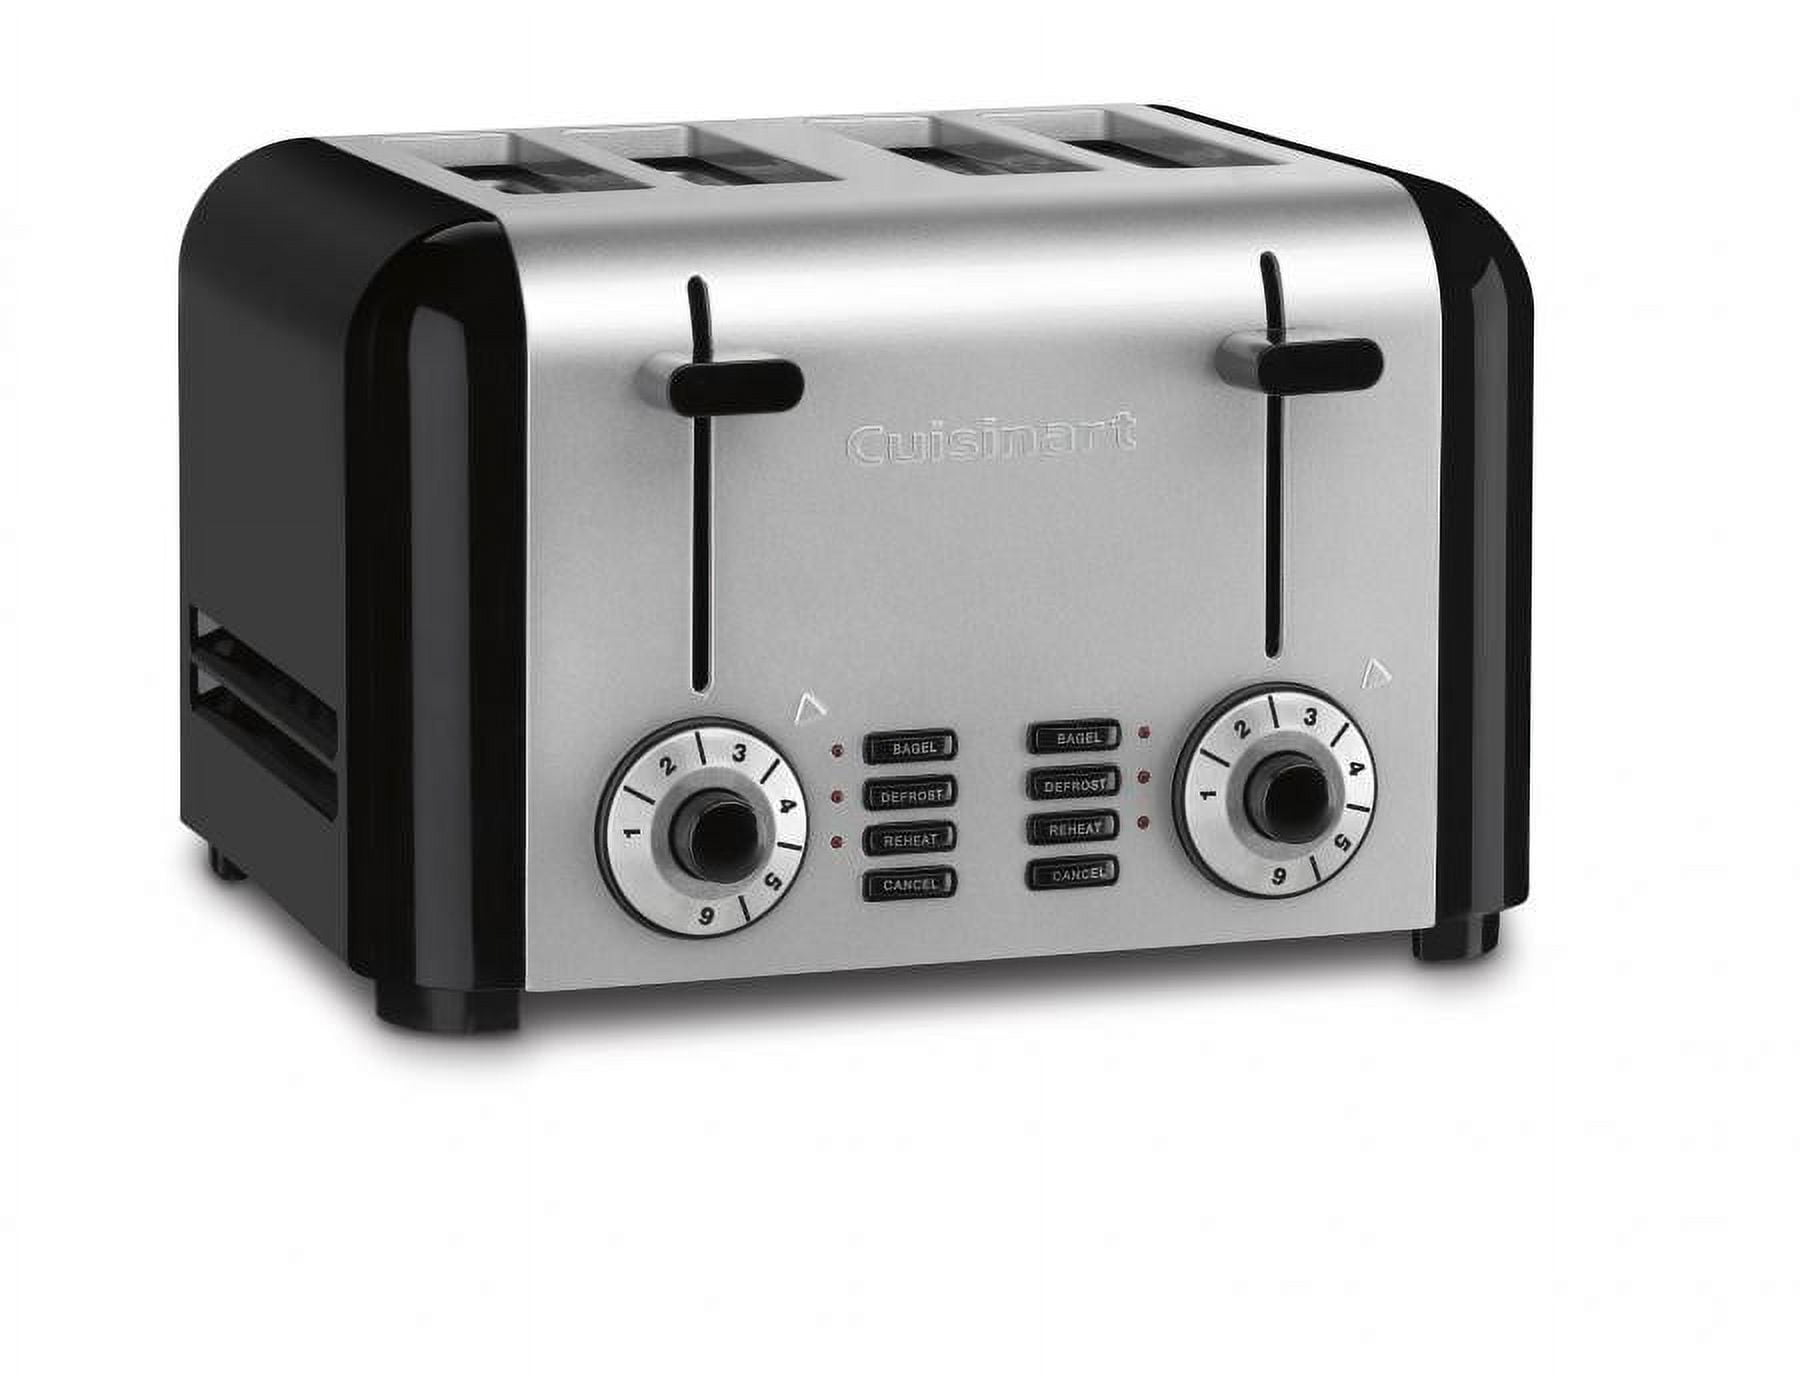 CPTT40P1 by Cuisinart - 4-Slice Touchscreen Toaster